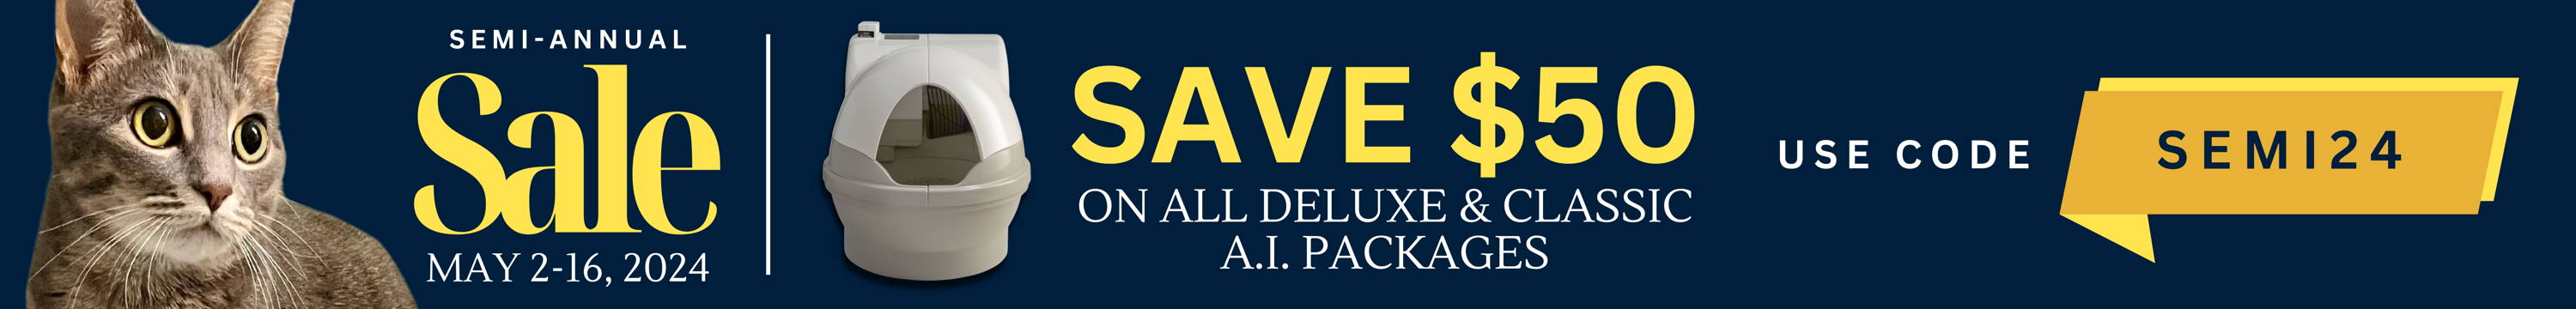 Semi-Annual Sale banner. Save 50 dollars on all Deluxe and Classic A.I. Packages with code SEMI24 until May 16th. 